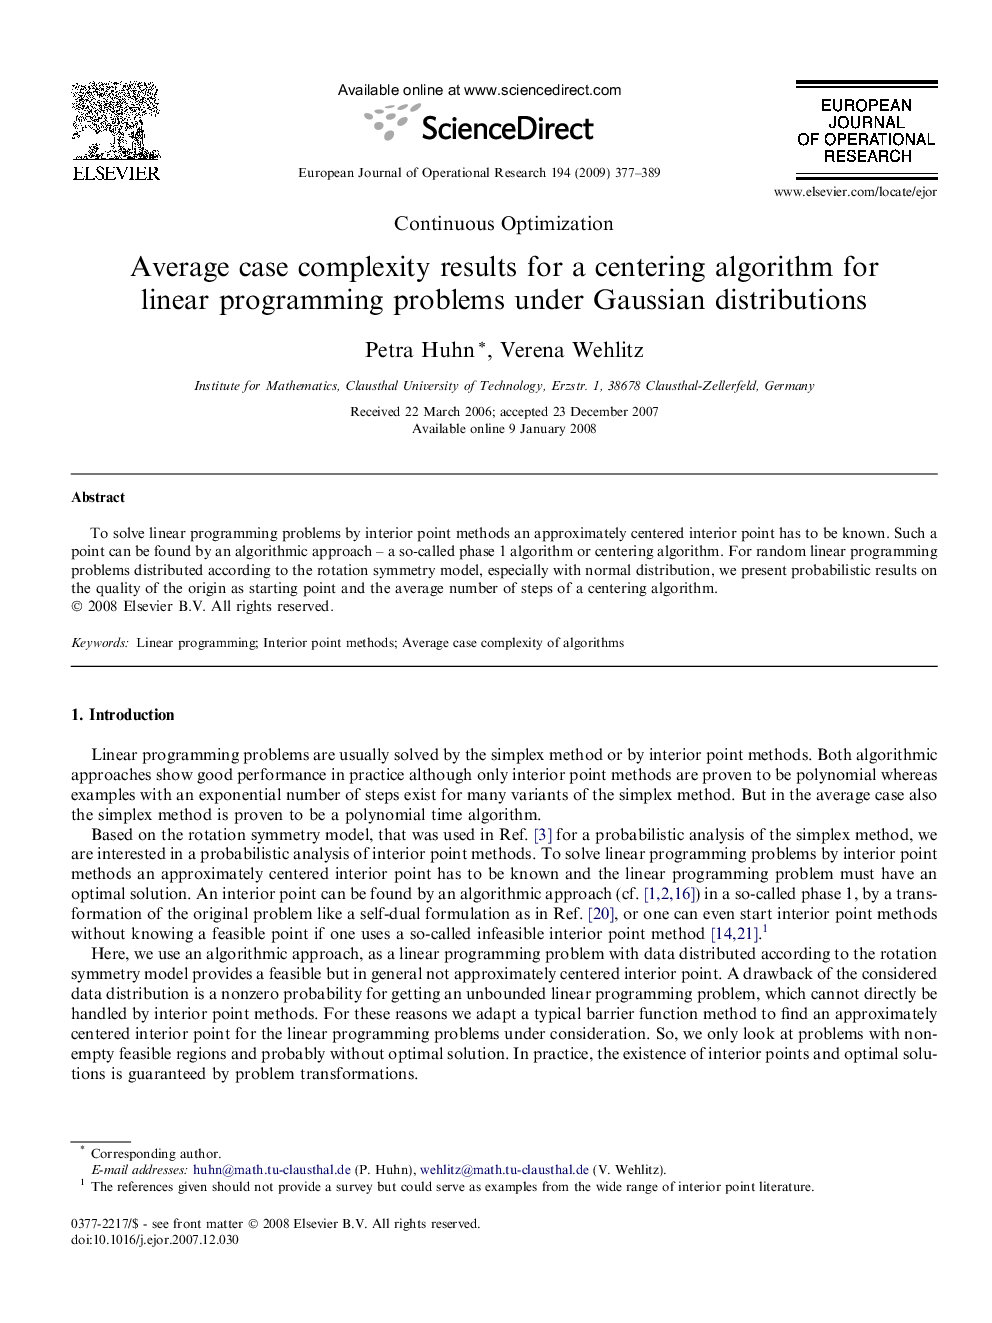 Average case complexity results for a centering algorithm for linear programming problems under Gaussian distributions